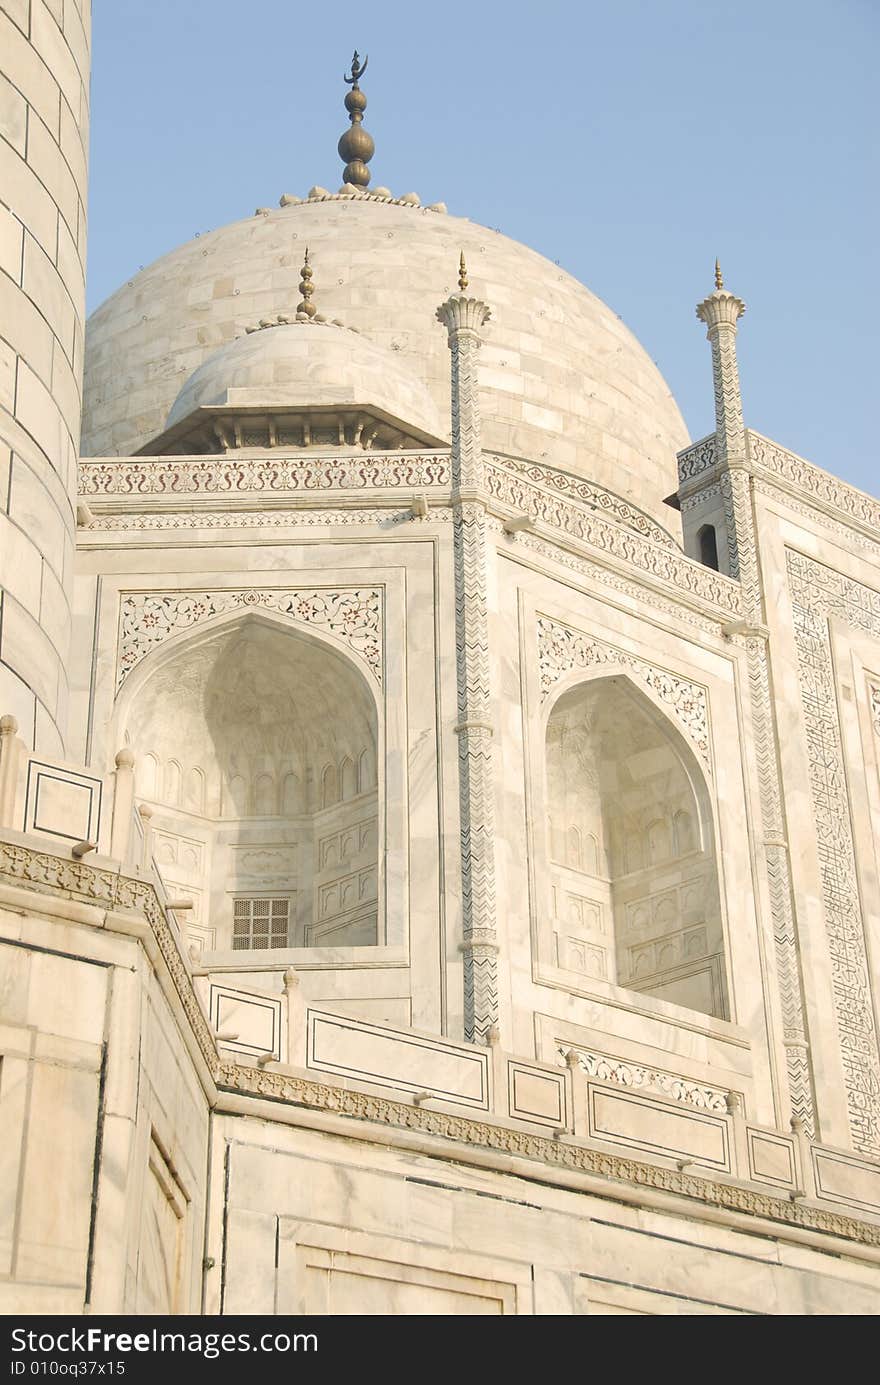 Upward Point of view of the Taj Mahal mausoleum in Agra, India showing the the primary dome as well as a corner dome and the edge of the minaret to form a side border. Upward Point of view of the Taj Mahal mausoleum in Agra, India showing the the primary dome as well as a corner dome and the edge of the minaret to form a side border